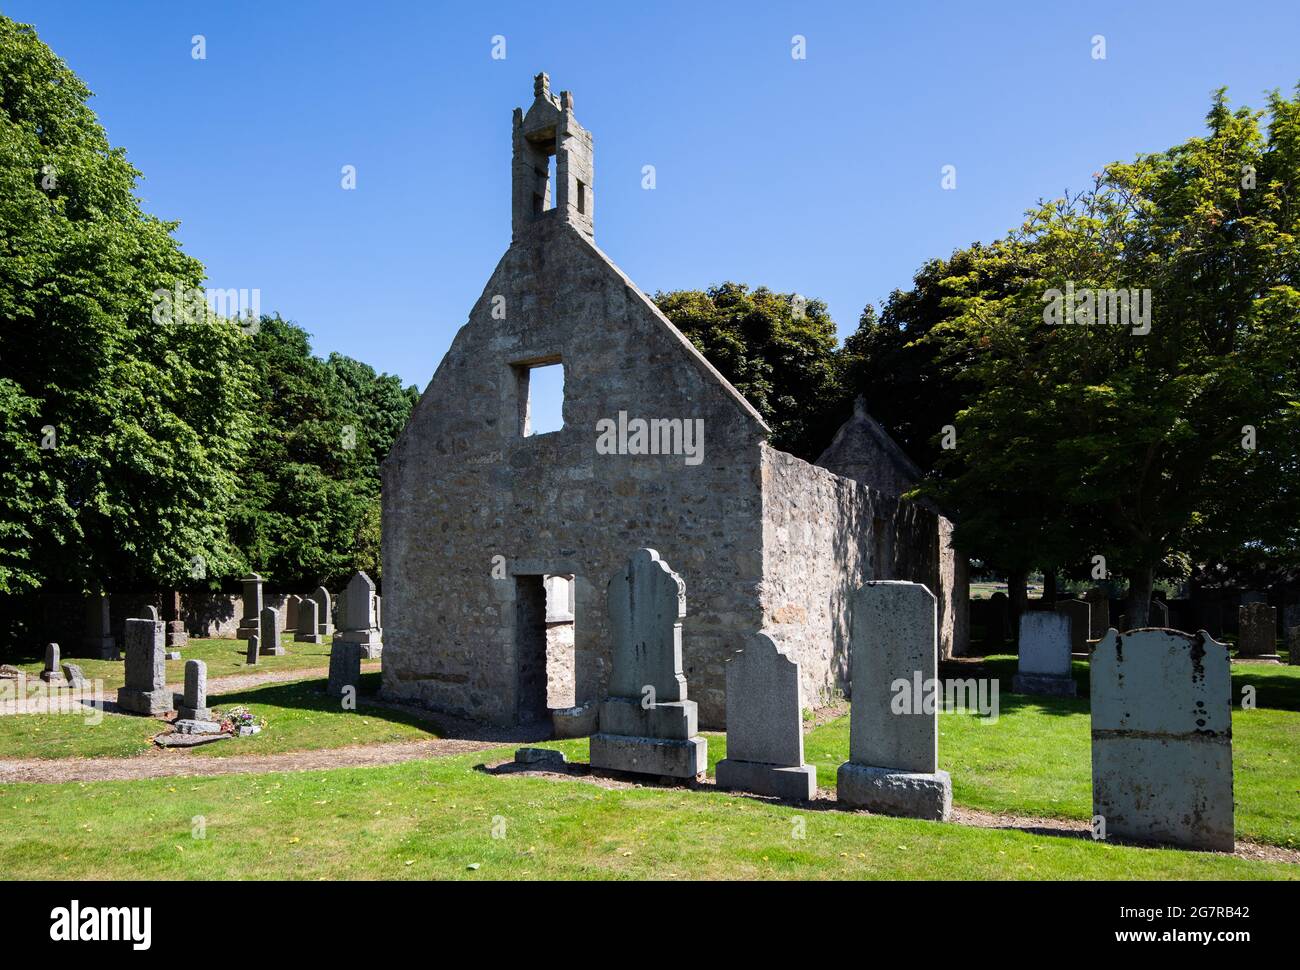 The Chapel of St Fergus kirk in Dyce, Aberdeen, Scotland, the location of the Dyce symbol stones, Pictish carved stones. Stock Photo